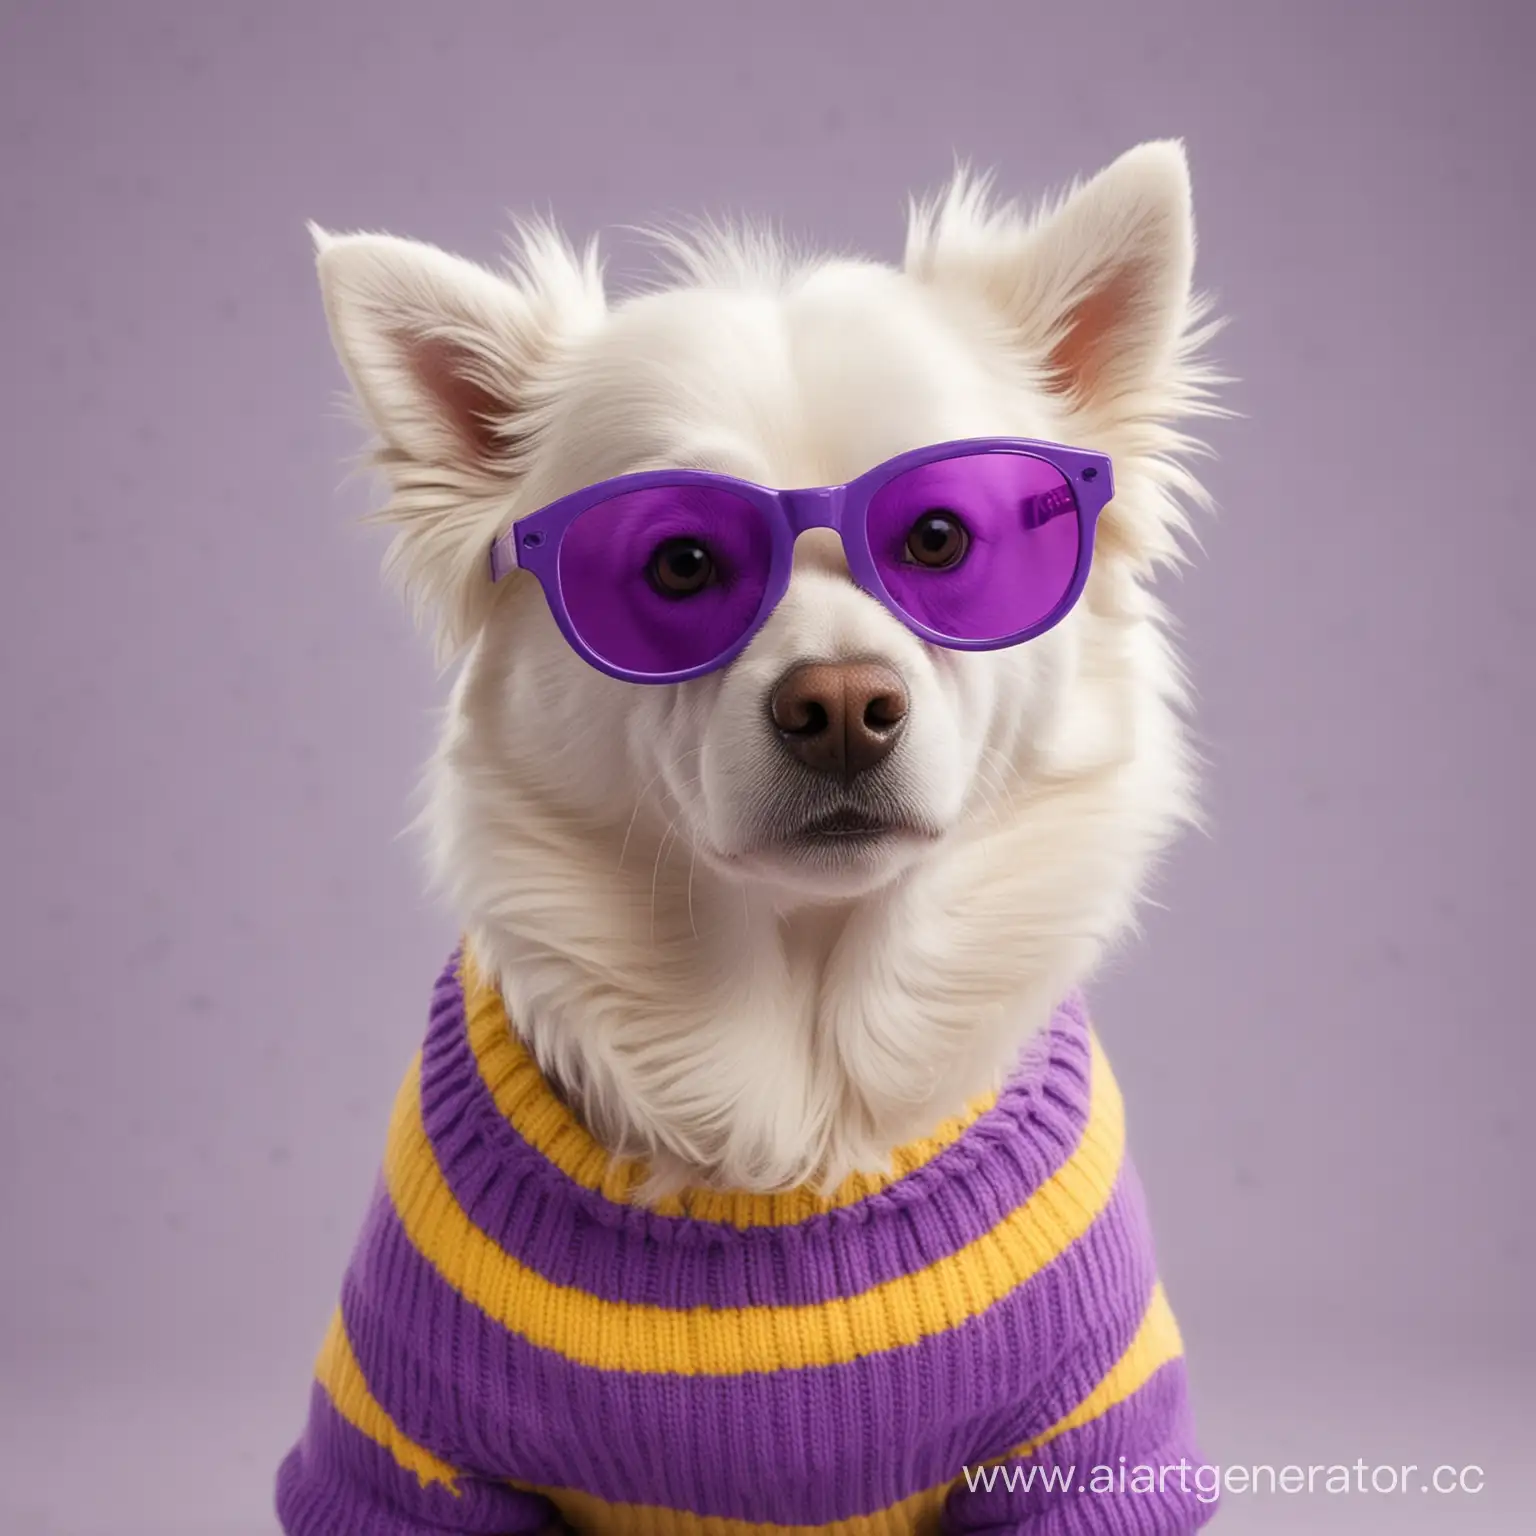 Adorable-White-Canine-in-Funky-Purple-Shades-and-Bright-Yellow-Knitwear